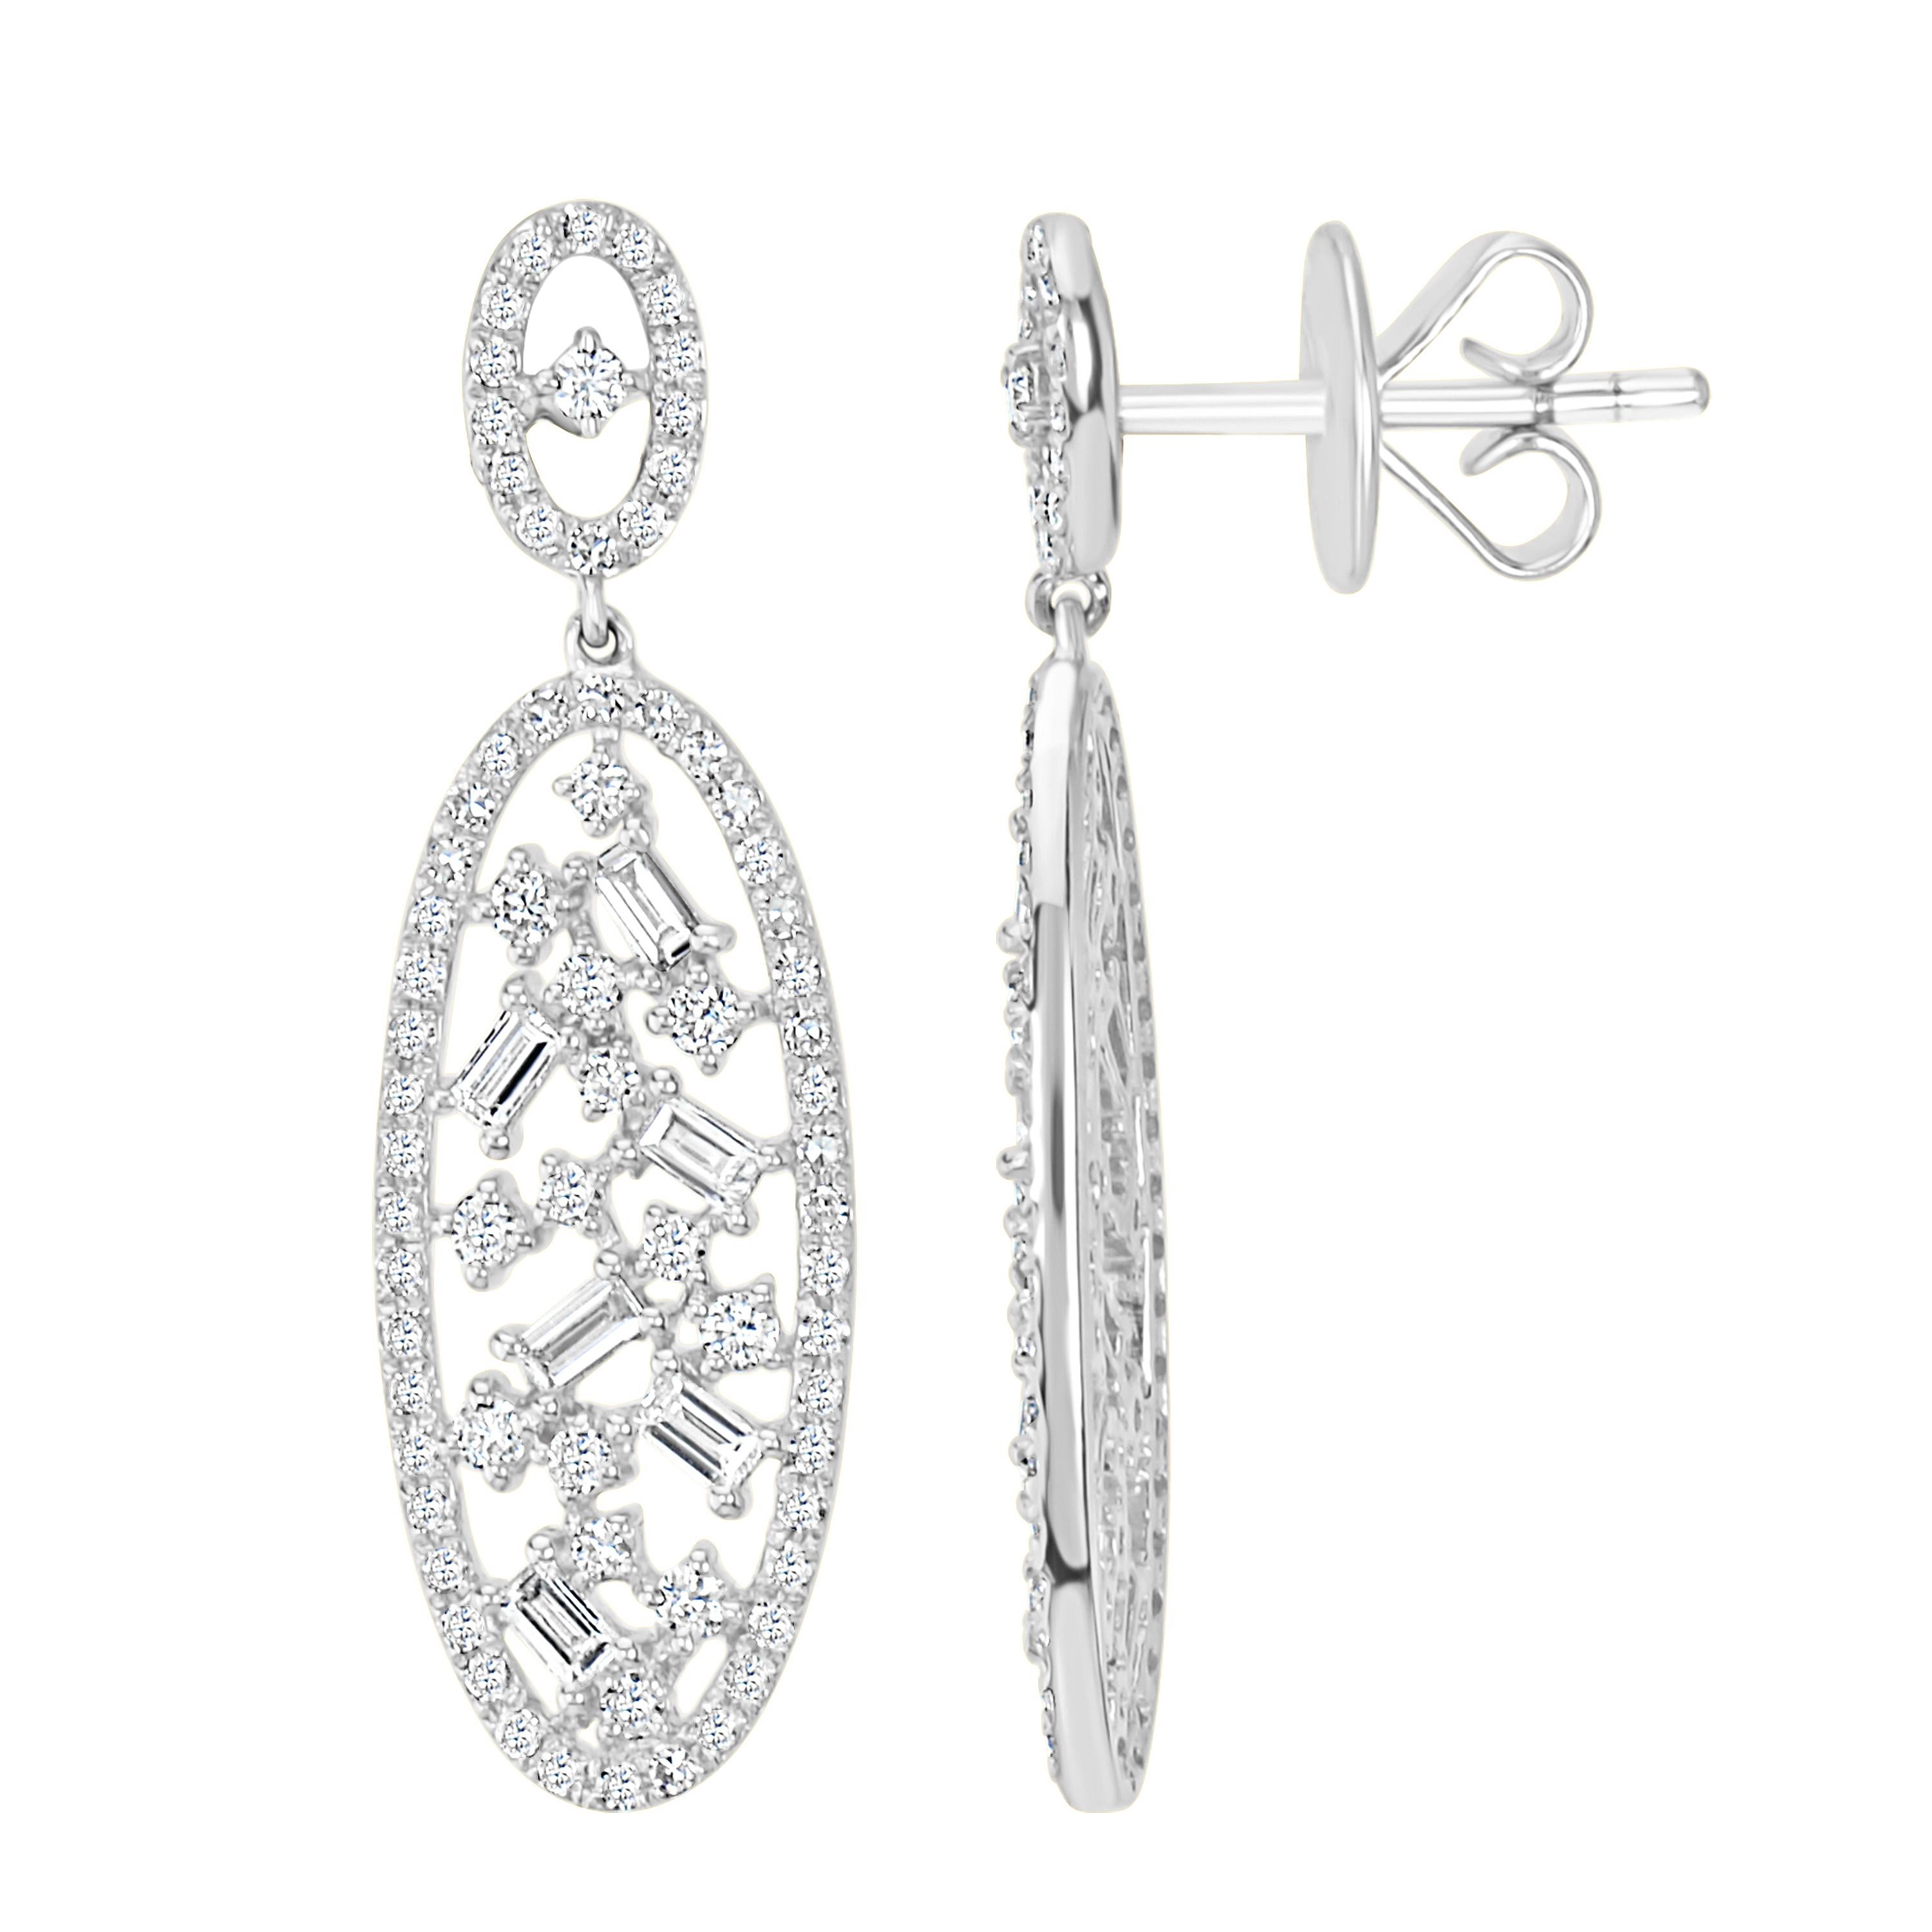 A serene combination of baguette and round diamonds Luxle 1.13 Ct total weight arranged in an oval drop design adorns this pair of classic earrings handcrafted in 14K white gold.
Please follow the Luxury Jewels storefront to view the latest